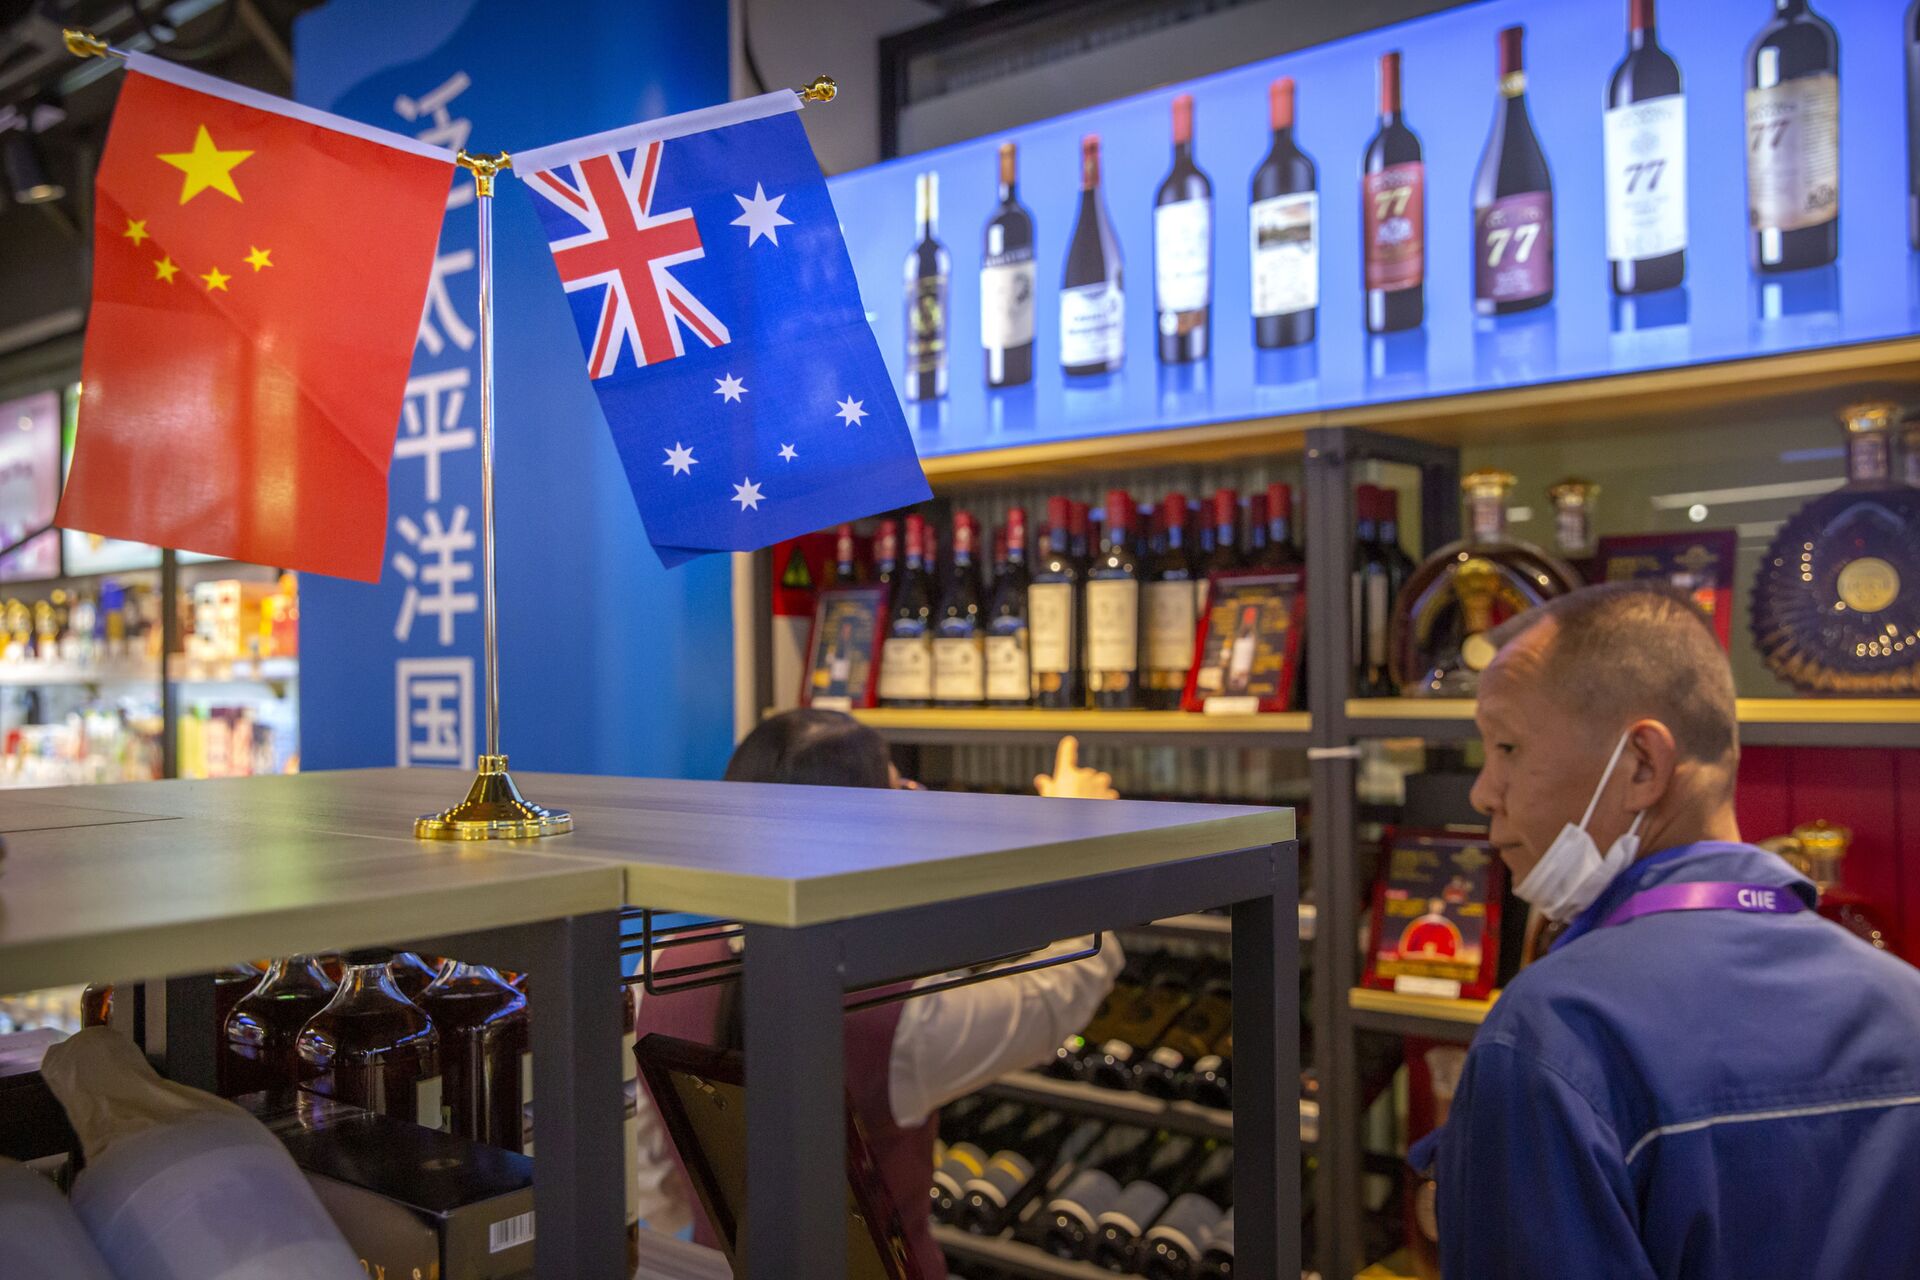 A visitor wearing a face mask to protect against the coronavirus looks at a display of Australian wines at the China International Import Expo (CIIE) in Shanghai on Nov. 5, 2020. China is raising import taxes on Australian wine, stepping up pressure on Australia over disputes including its support for a probe into the origin of the coronavirus. - Sputnik International, 1920, 21.09.2021